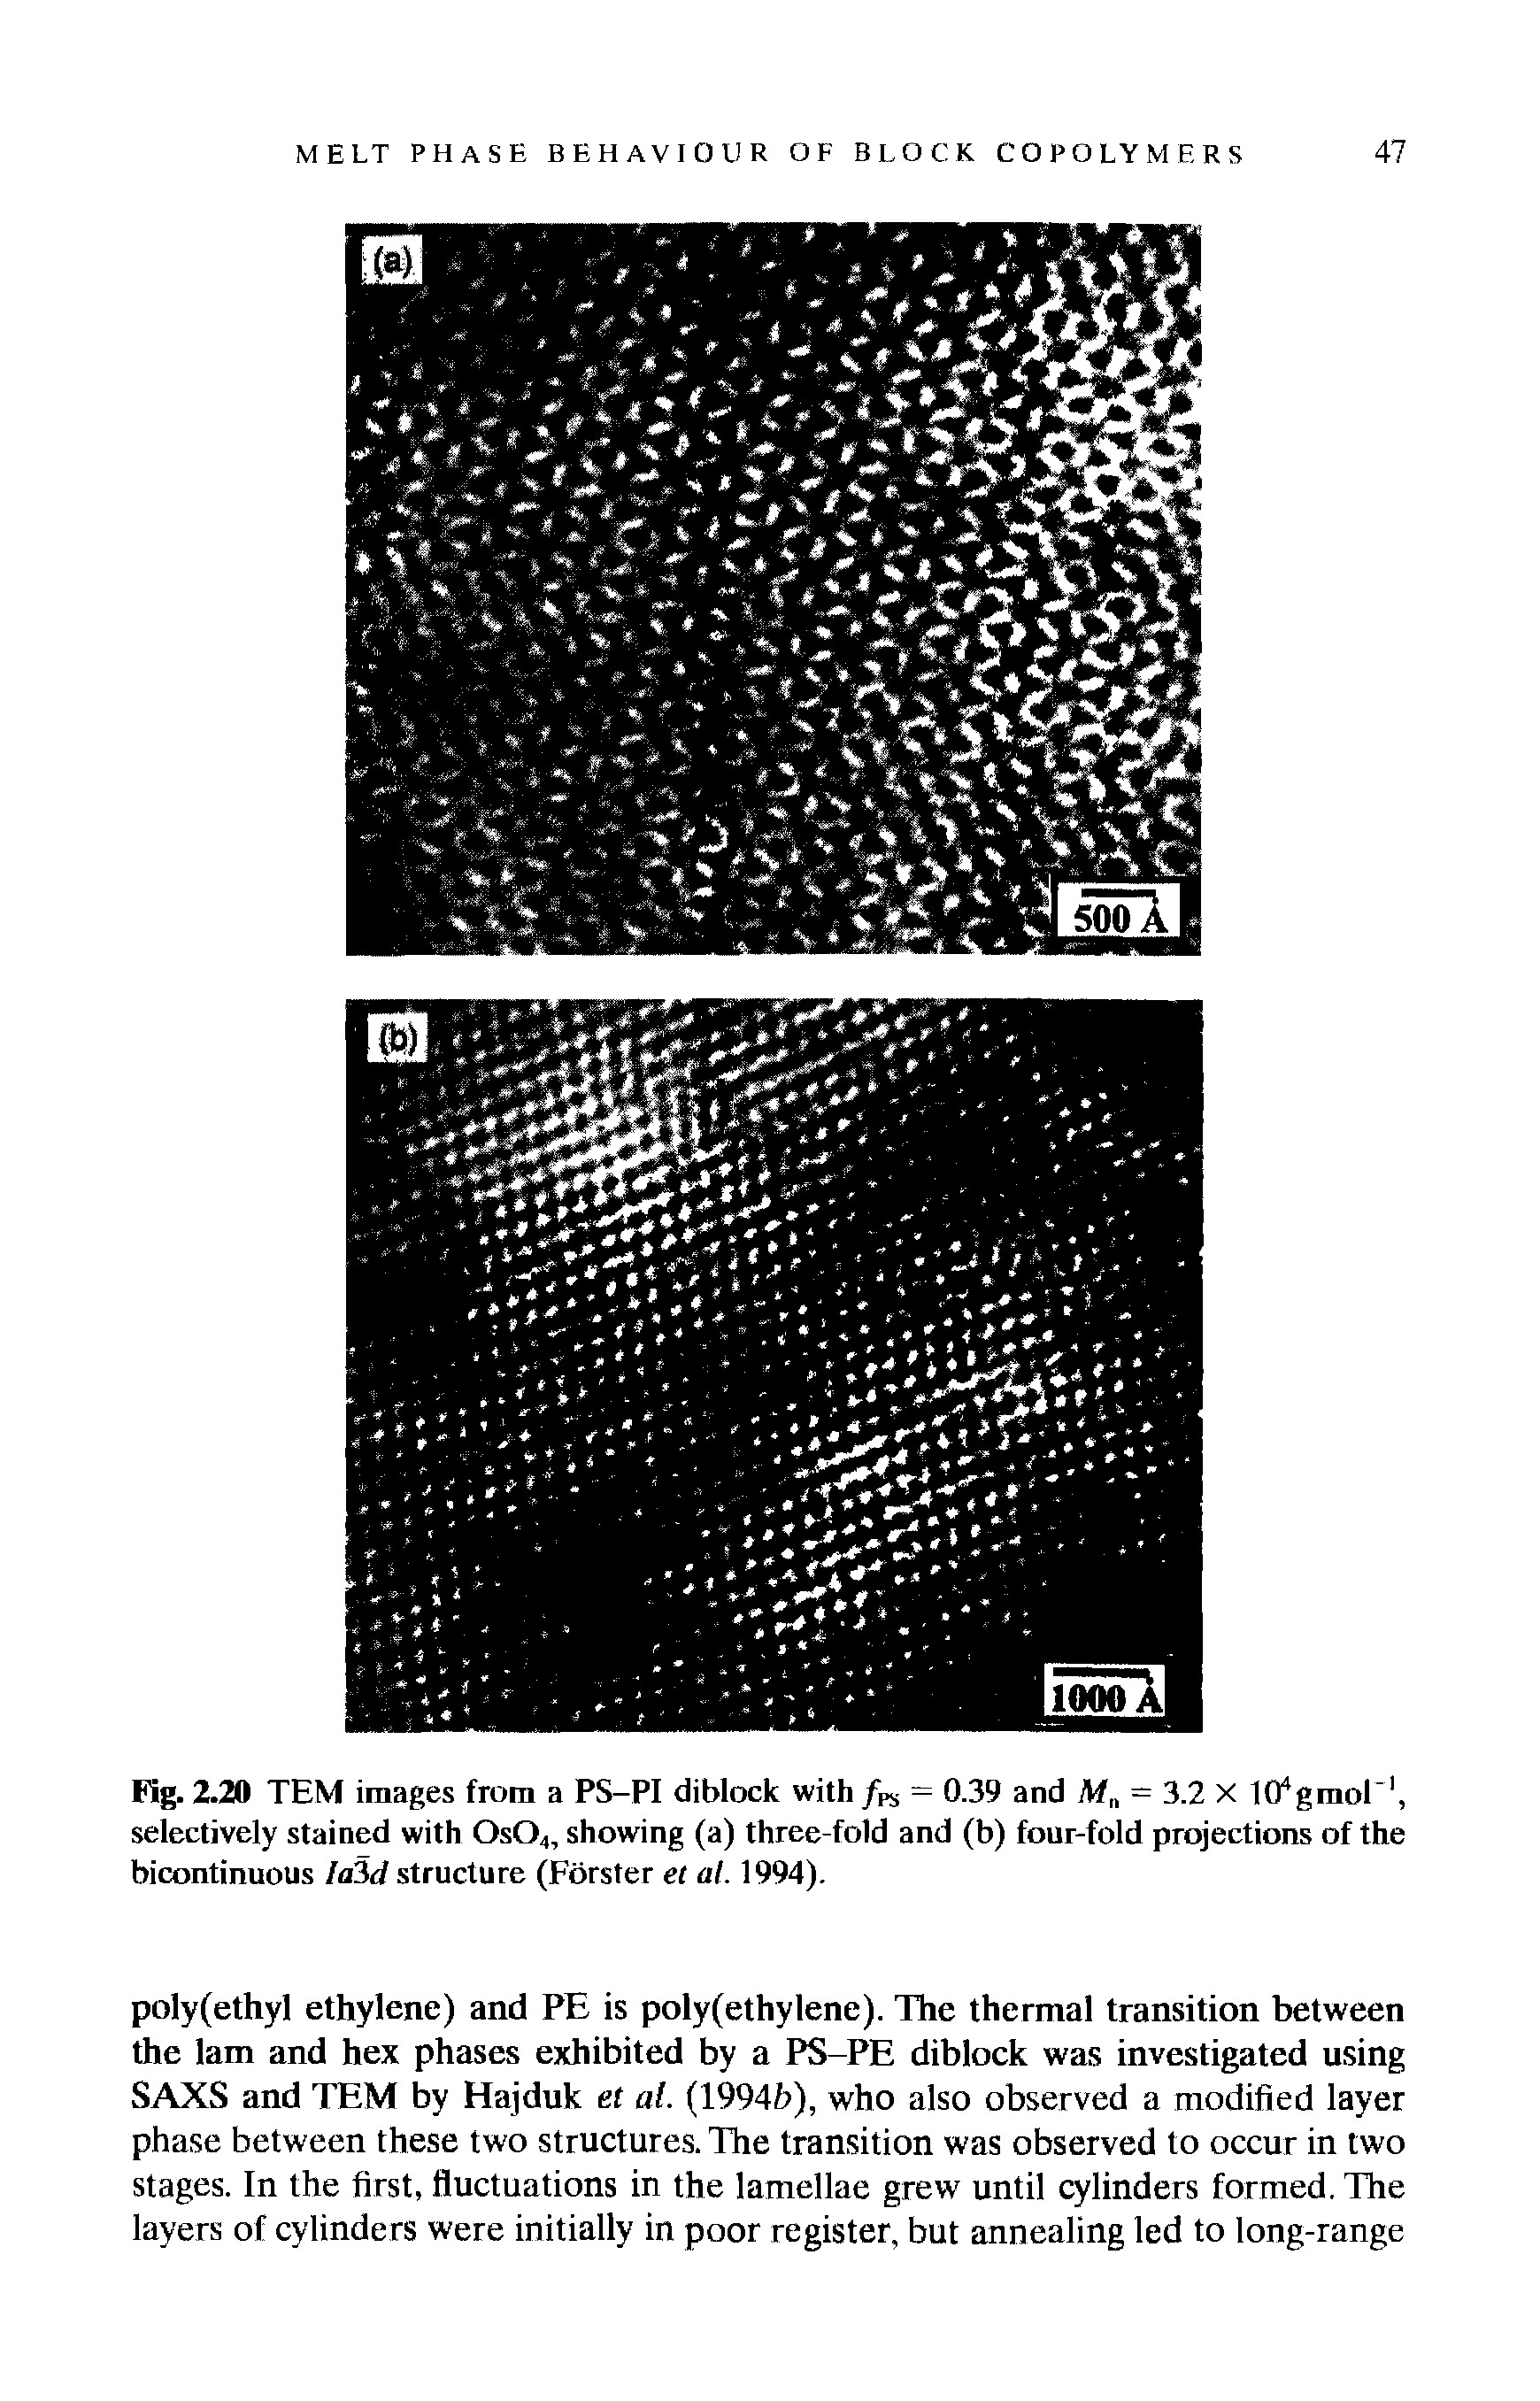 Fig. 2.20 TEM images from a PS-PI diblock with = 0.39 and M = 3.2 X Kfgmol"1, selectively stained with 0s04, showing (a) three-fold and (b) four-fold projections of the bicontinuous laSd structure (Forster et al. 1994).